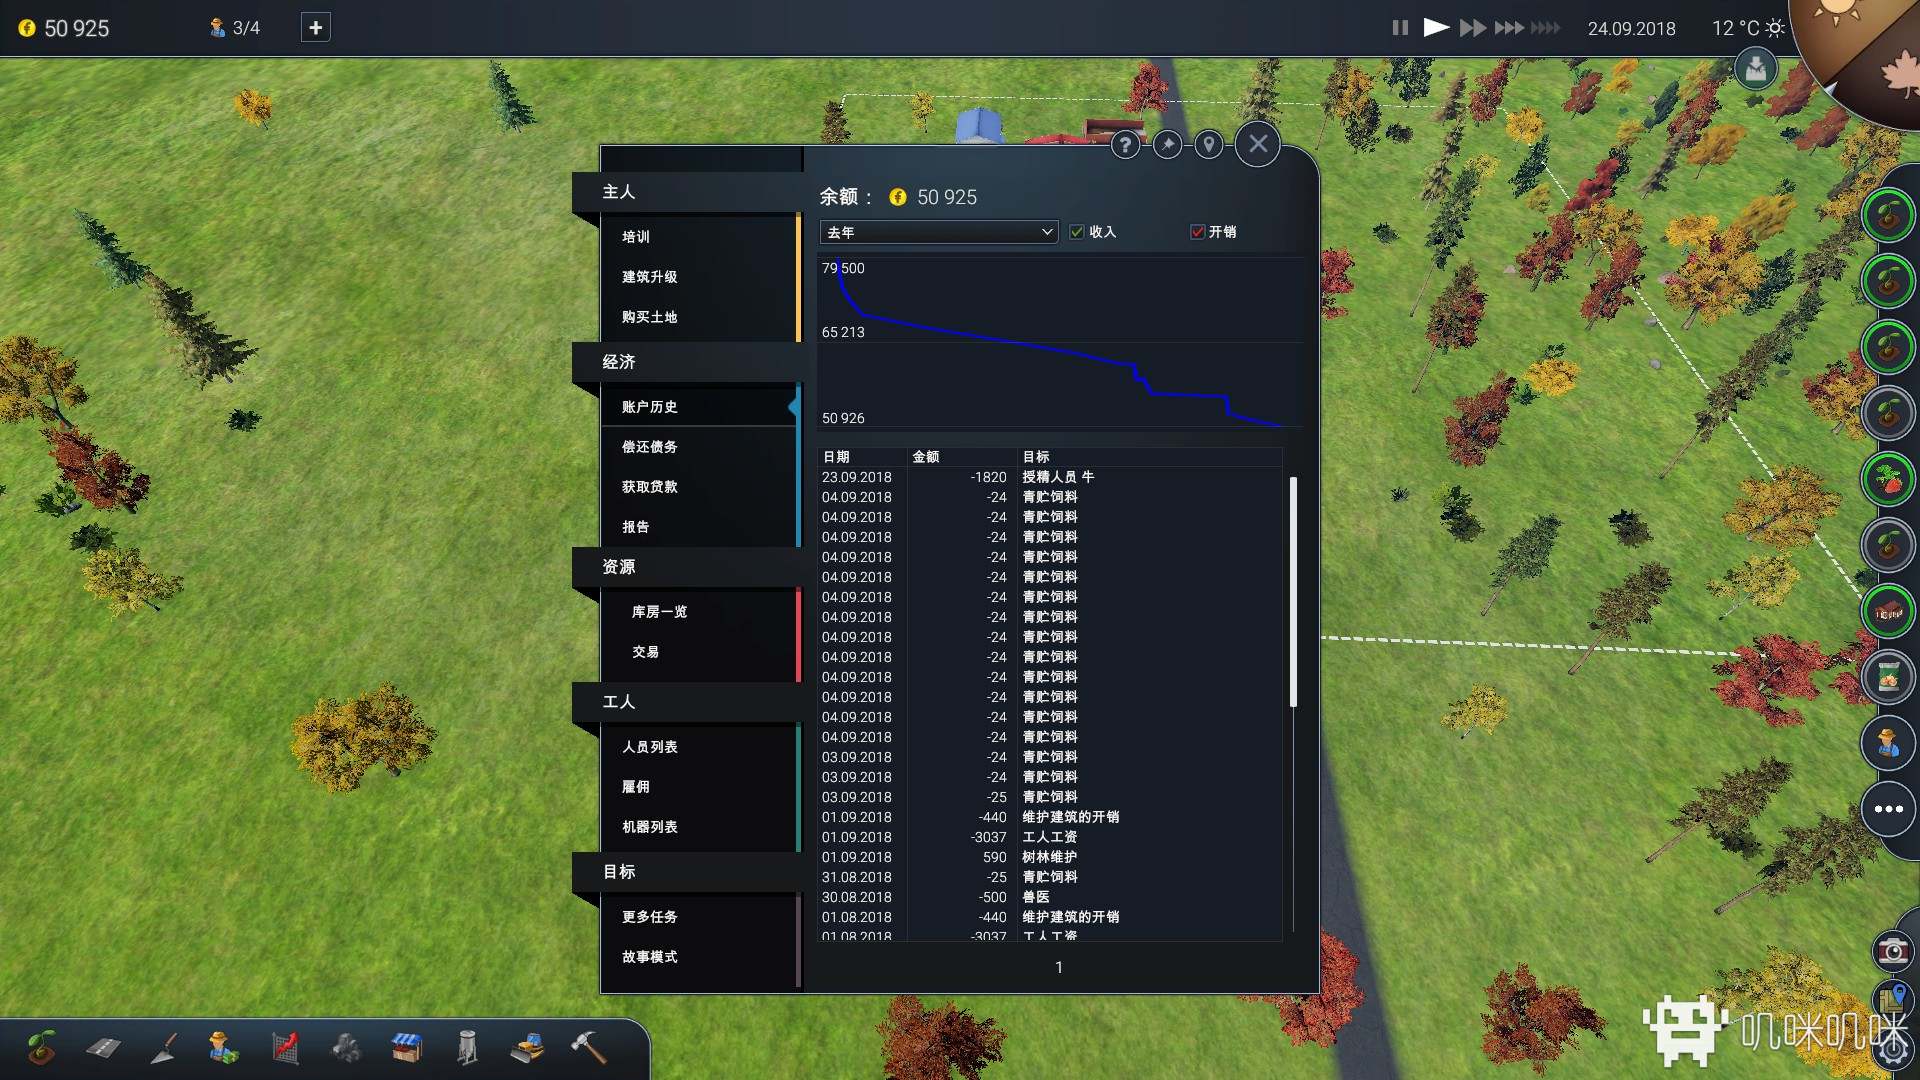 Farm Manager 2018 - Brewing & Winemaking DLC游戏评测20190807003